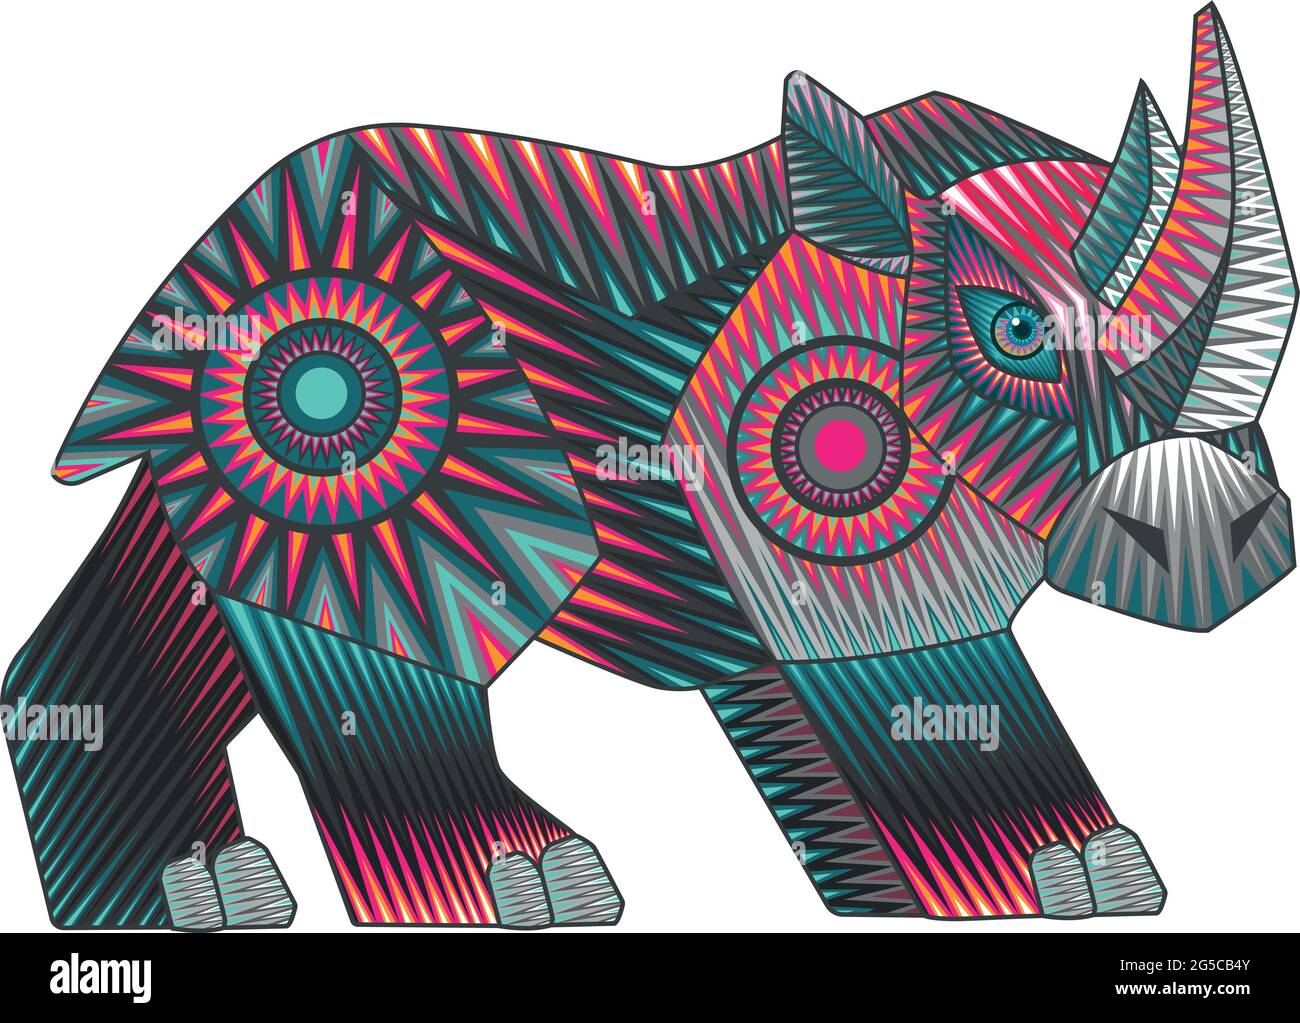 Hand drawn vector illustration or drawing of a colorful mexican indigenous rhino in a traditional alebrije style Stock Vector